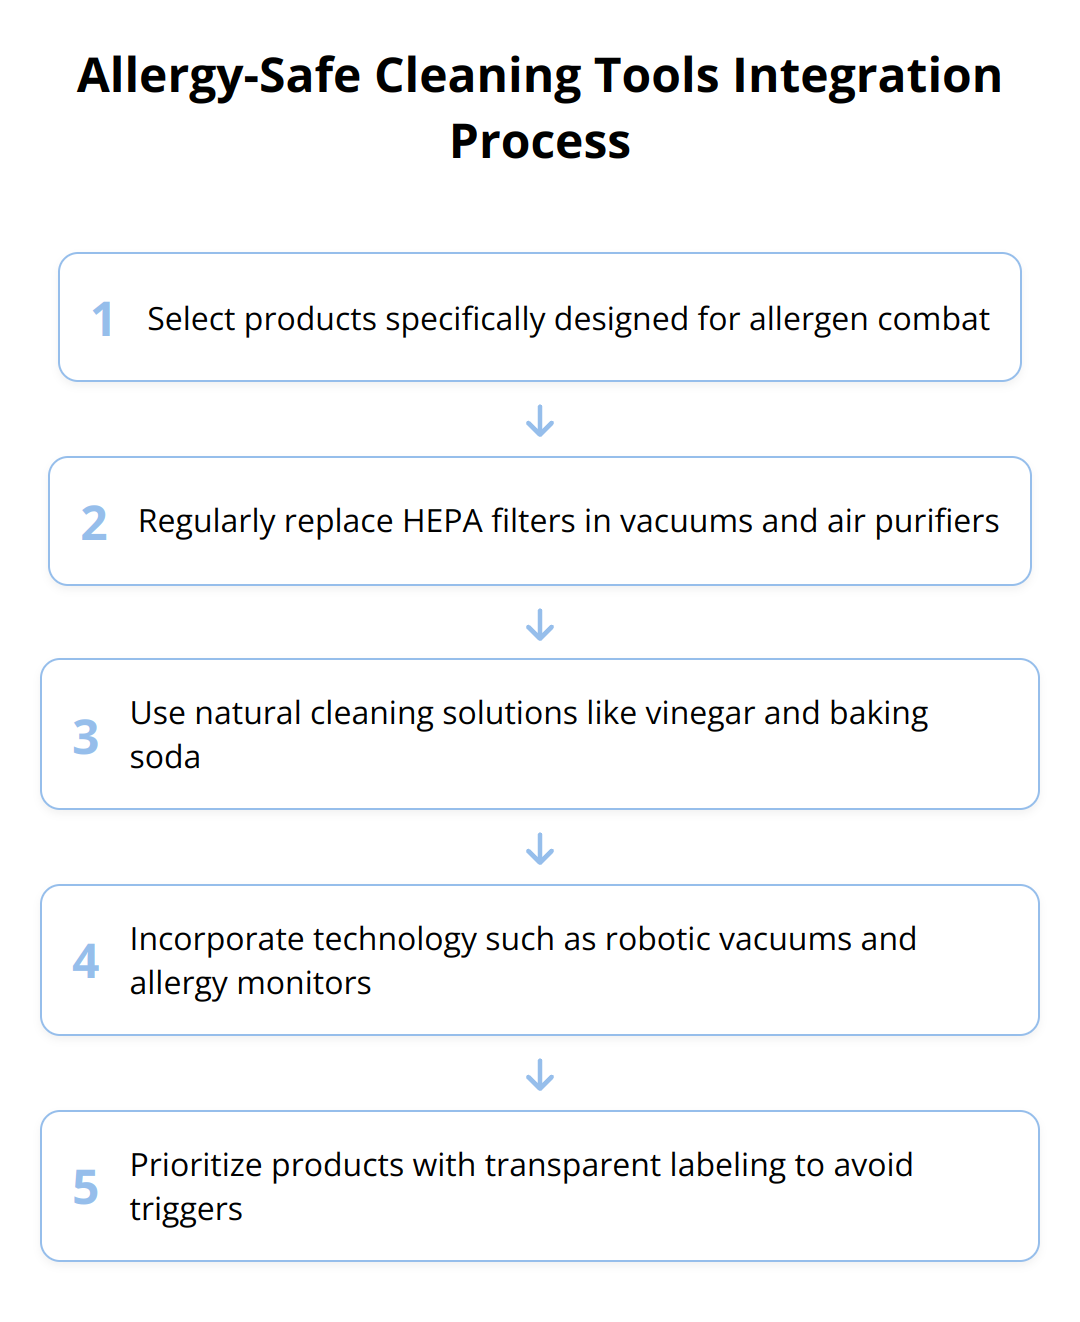 Flow Chart - Allergy-Safe Cleaning Tools Integration Process